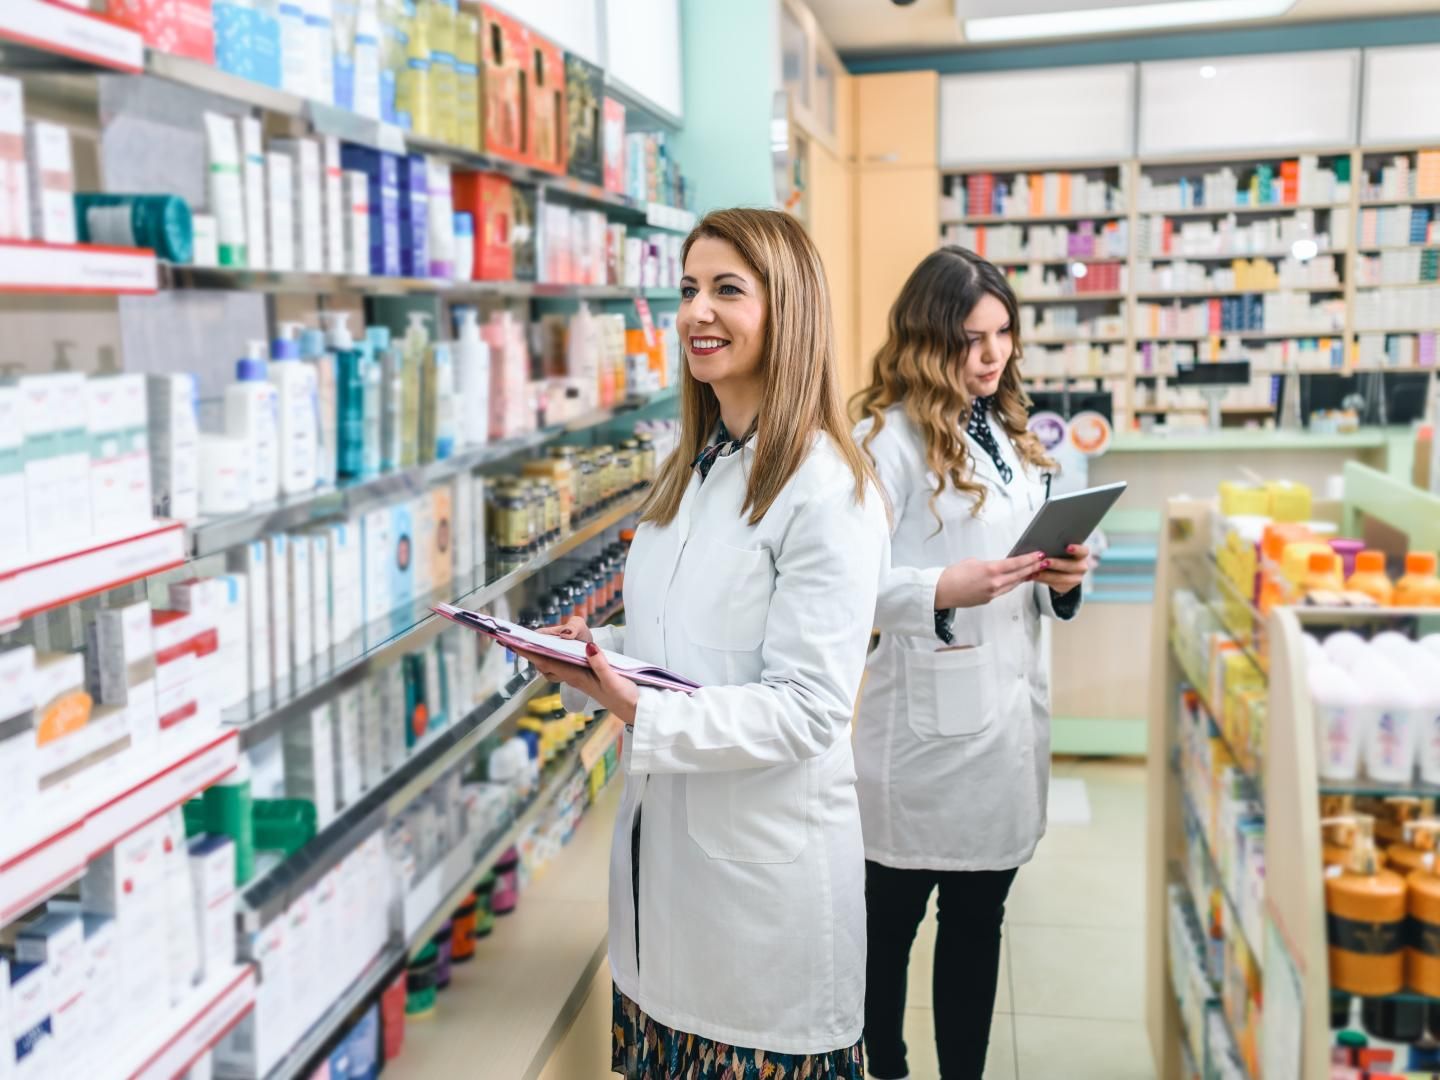 Types of pharmacy automation solutions